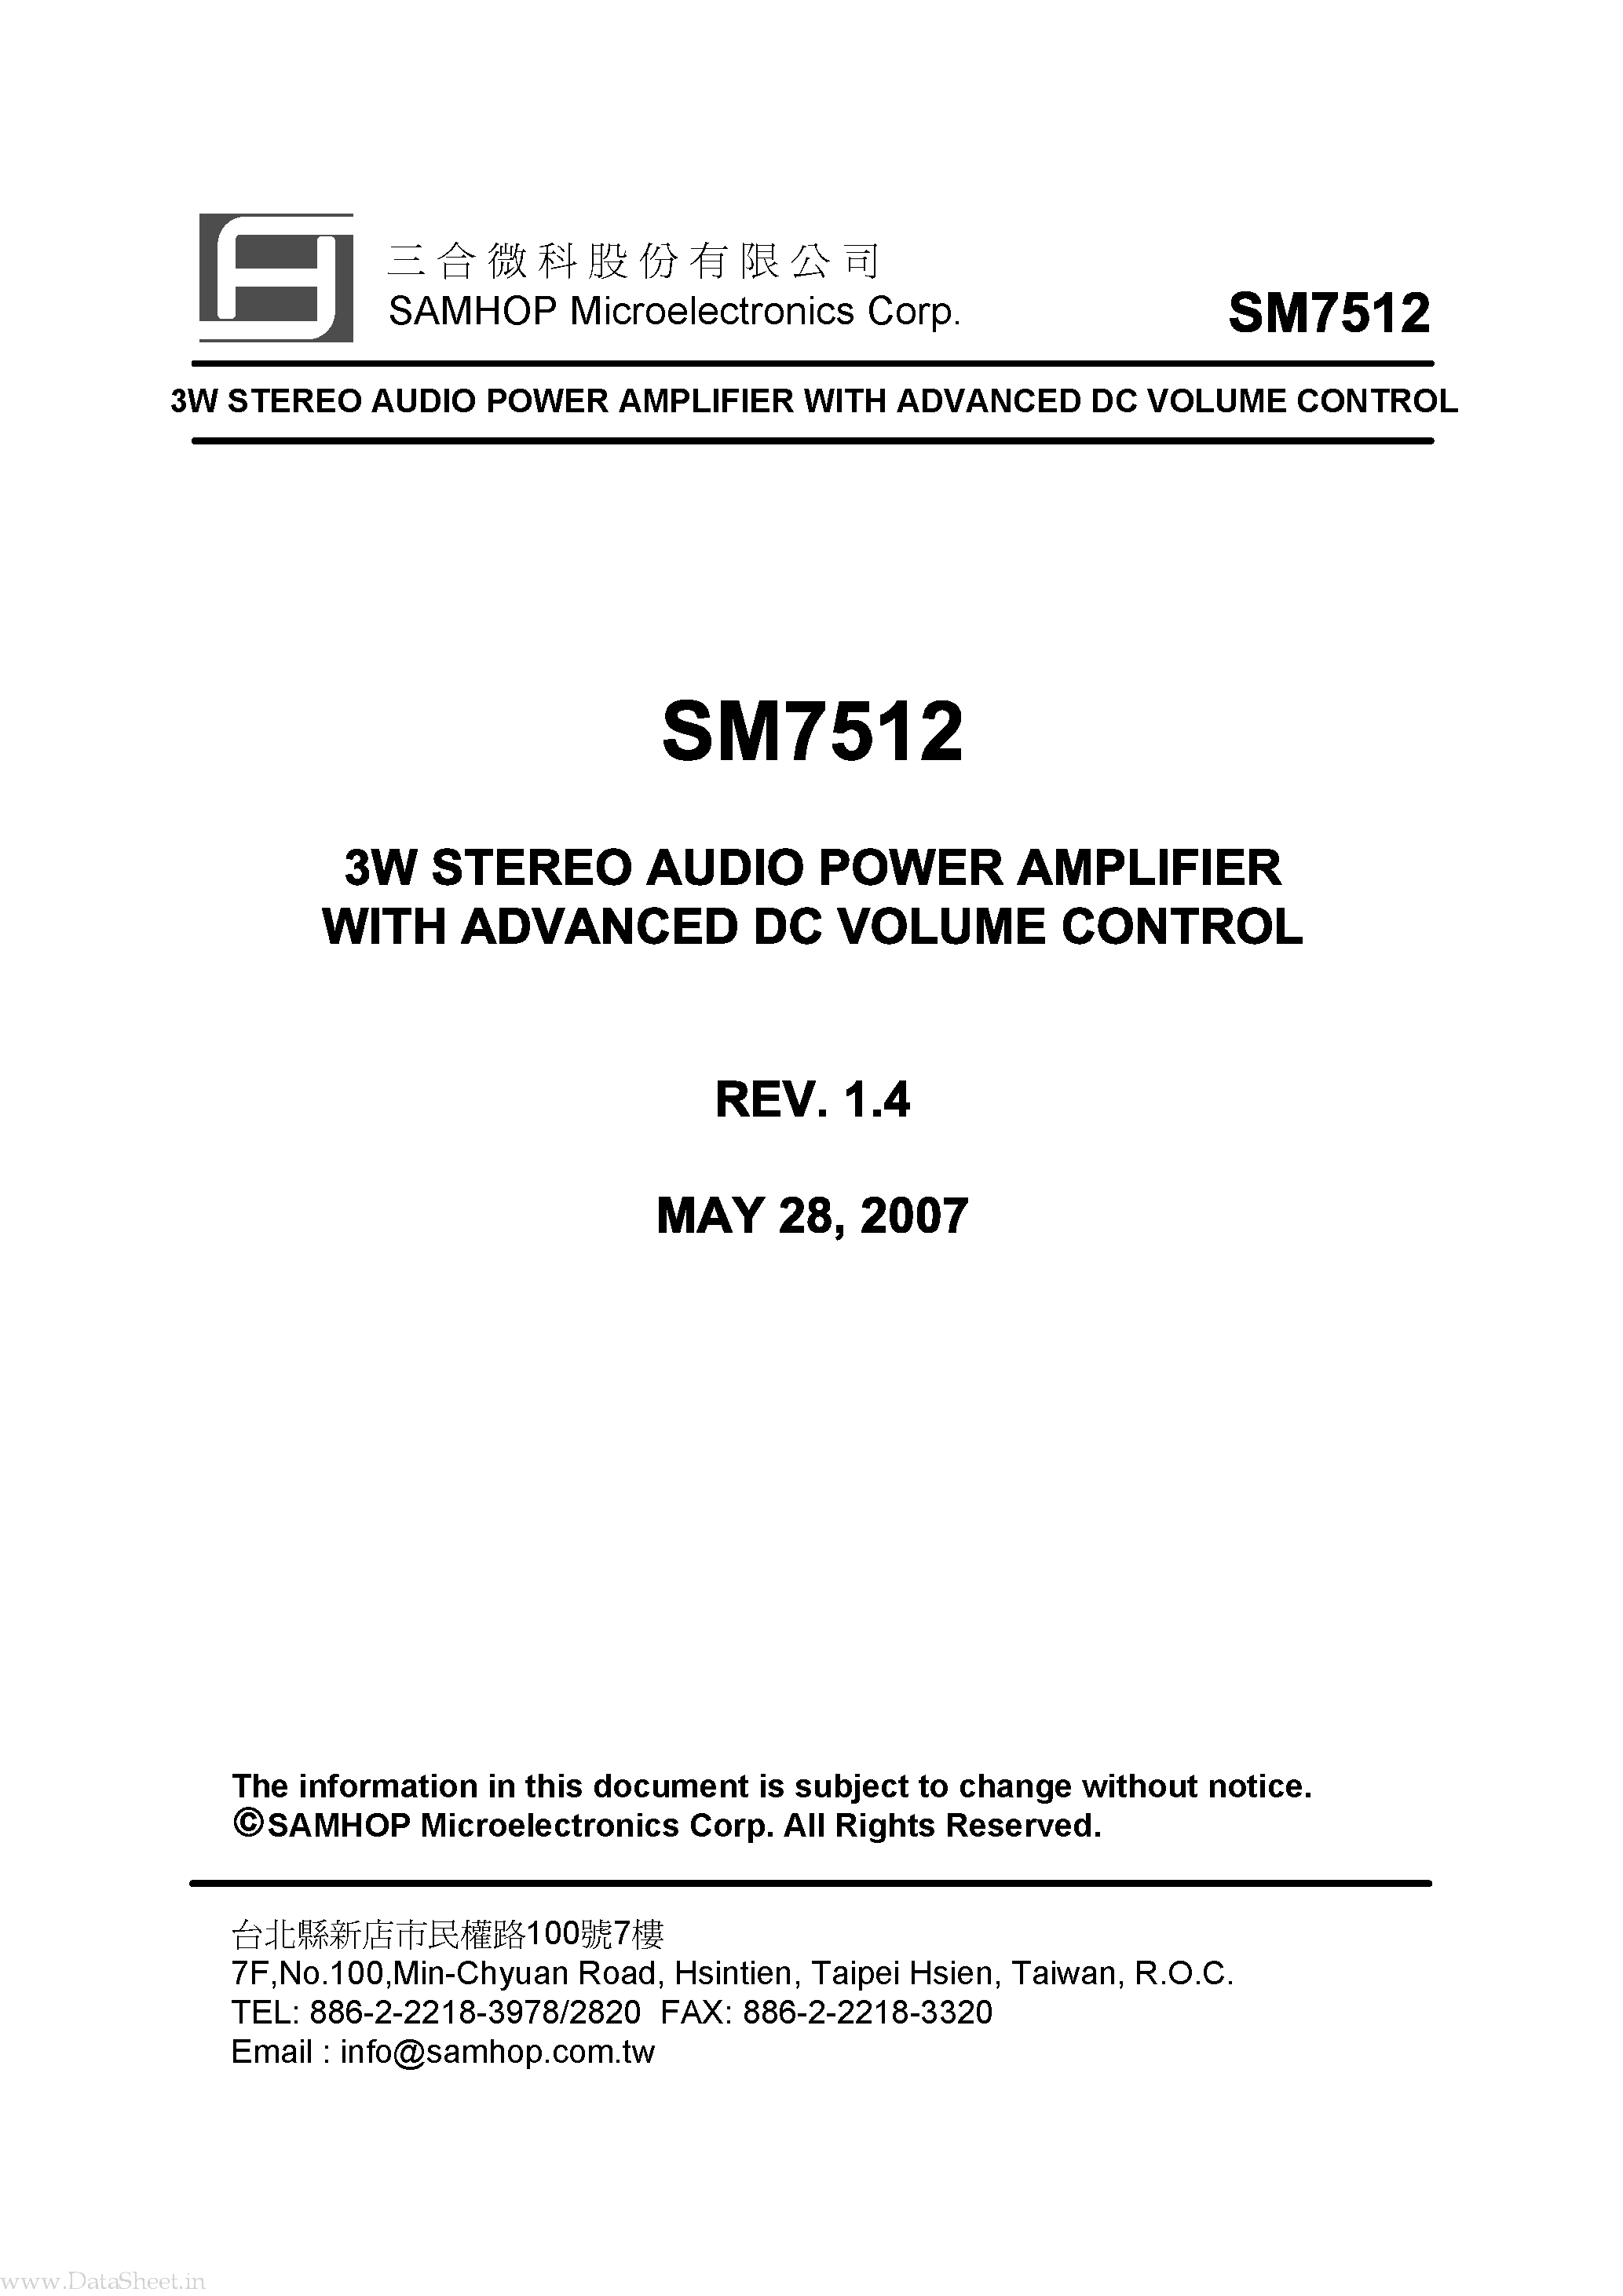 Datasheet SM7512 - 3W STEREO AUDIO POWER AMPLIFIER page 1